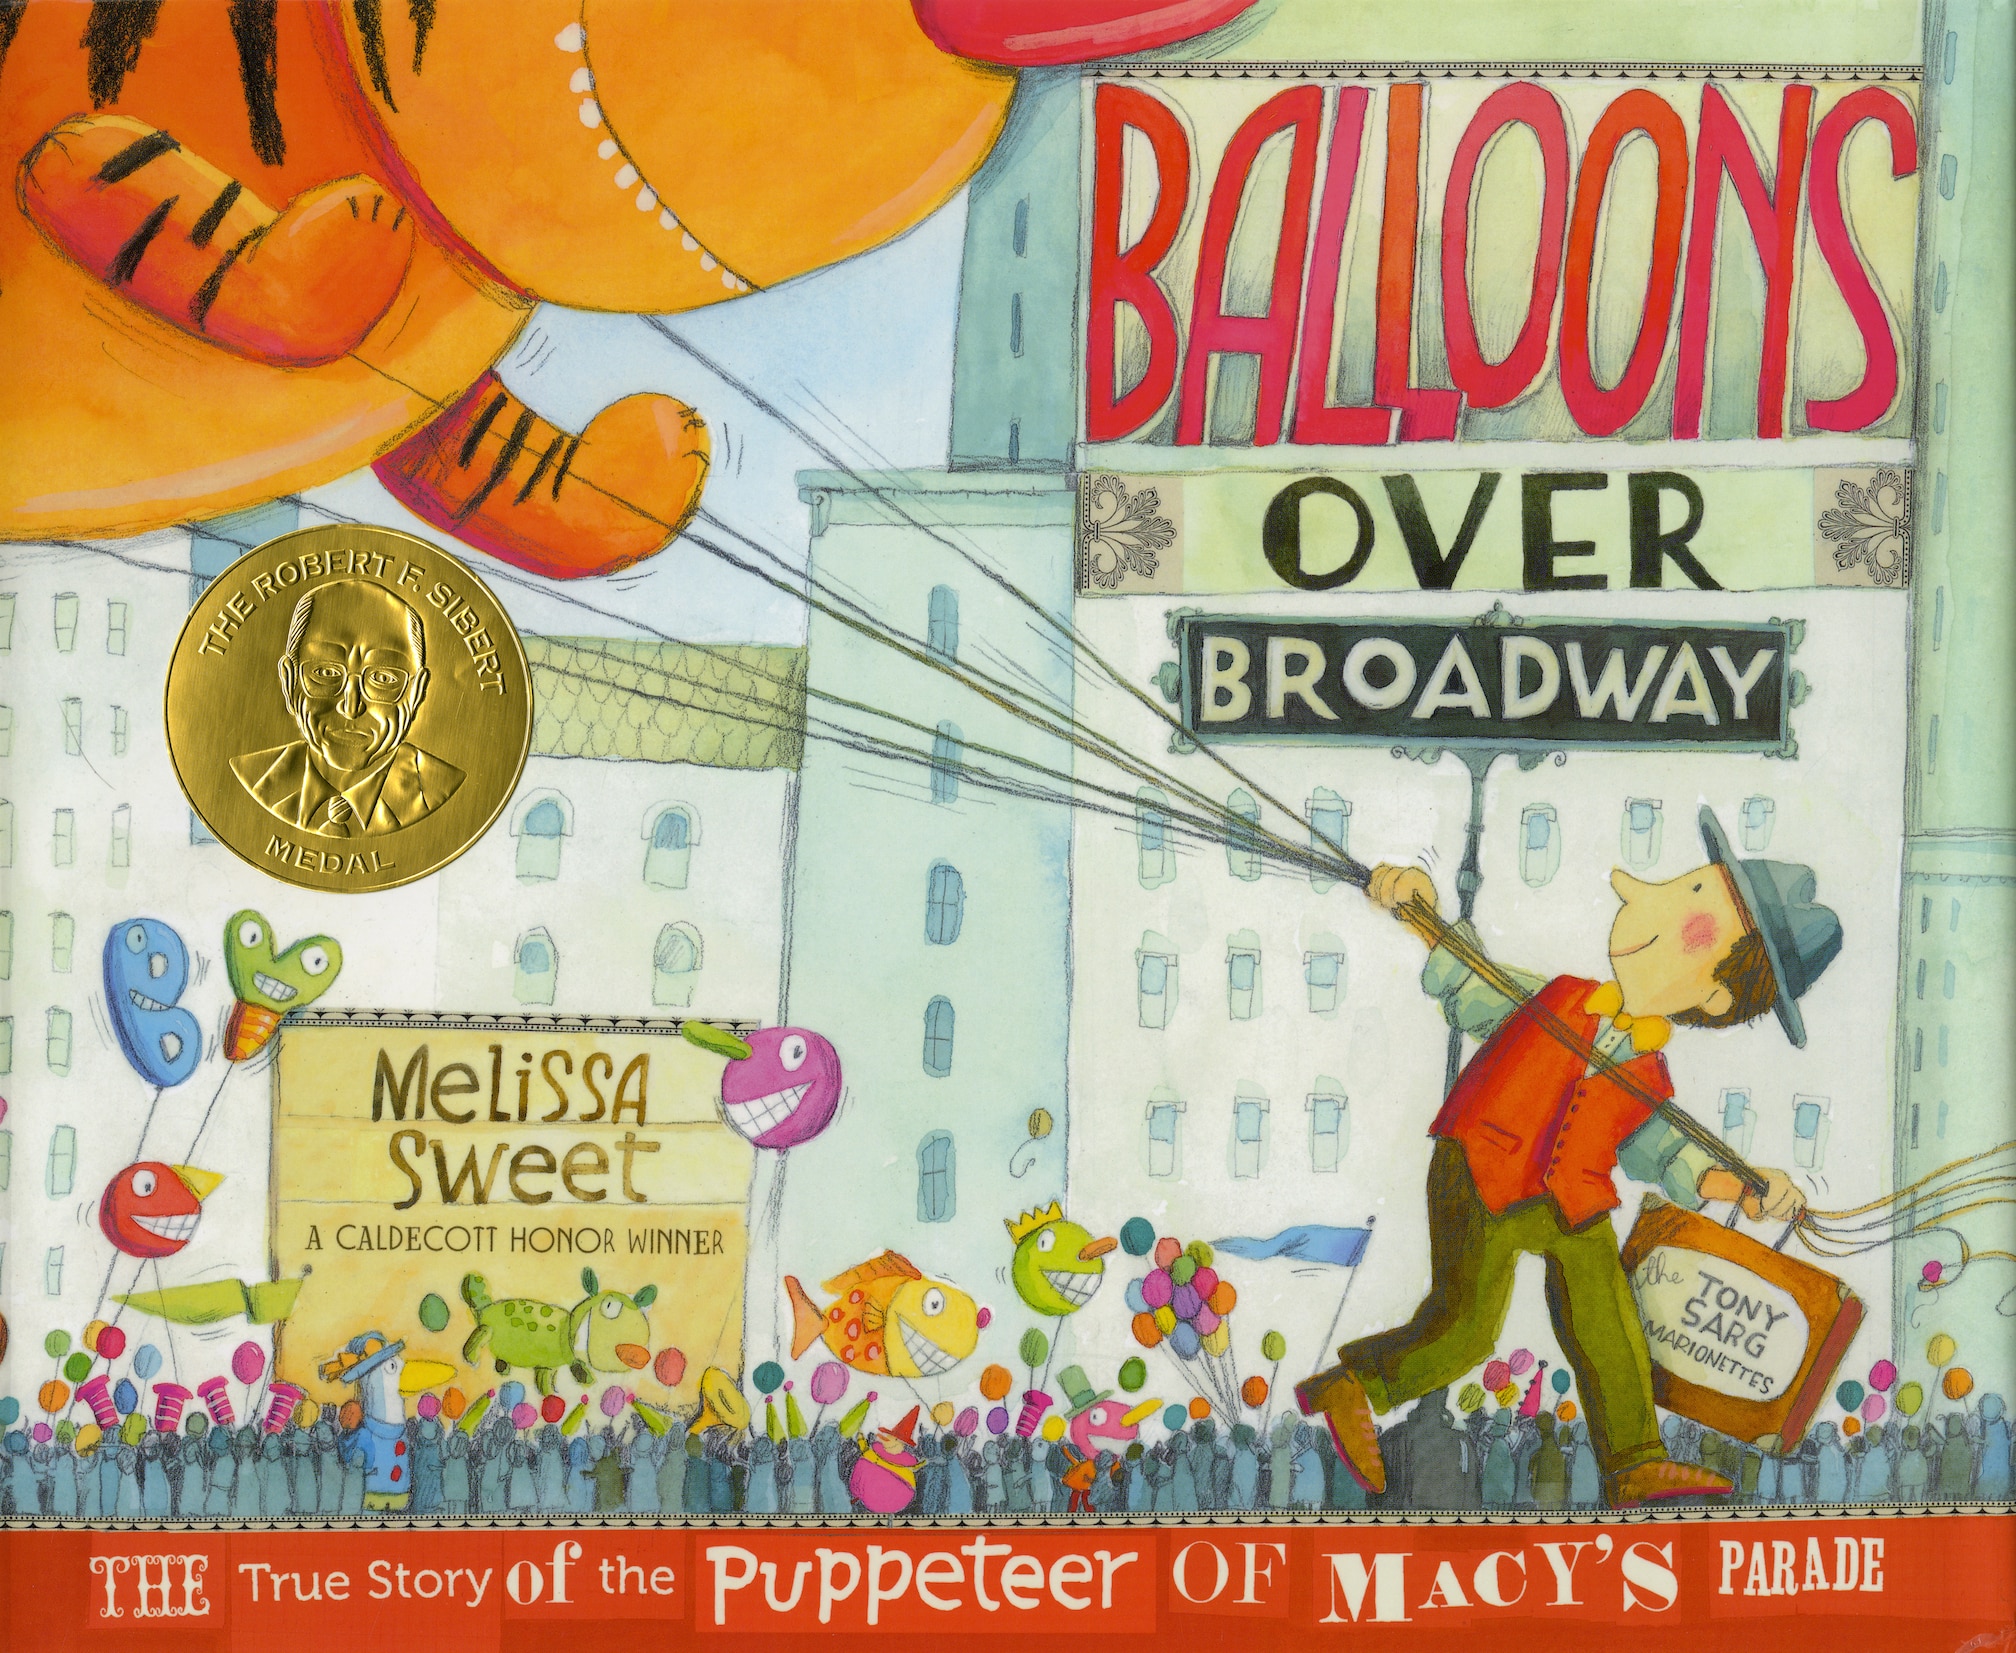 The cover for the book Balloons Over Broadway